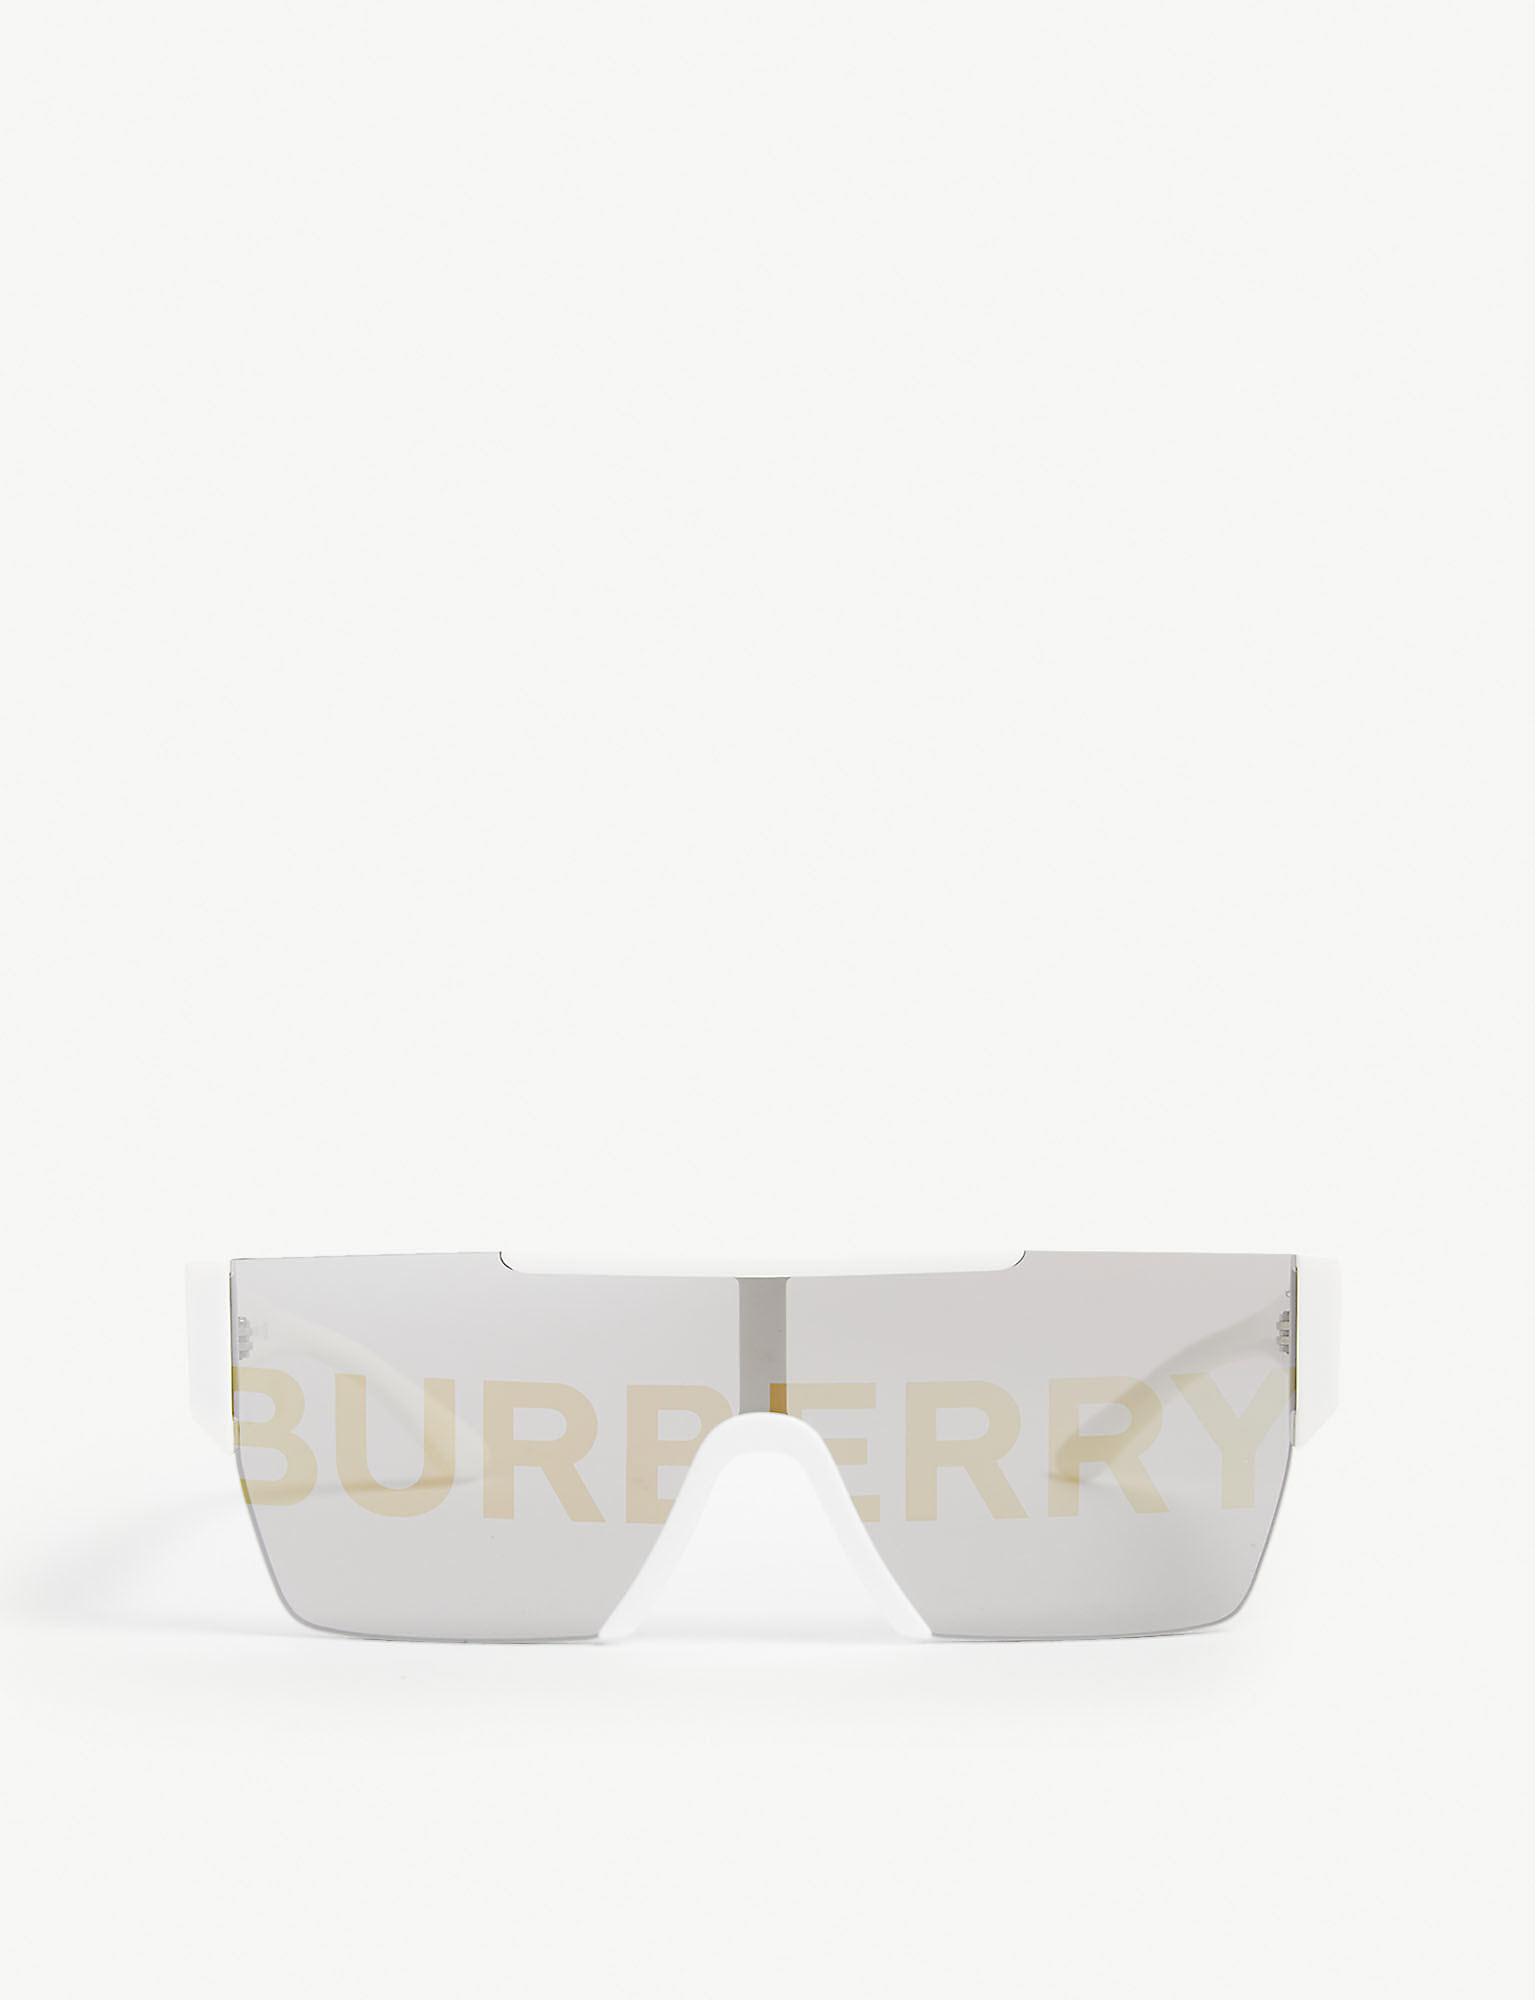 burberry be4291 white